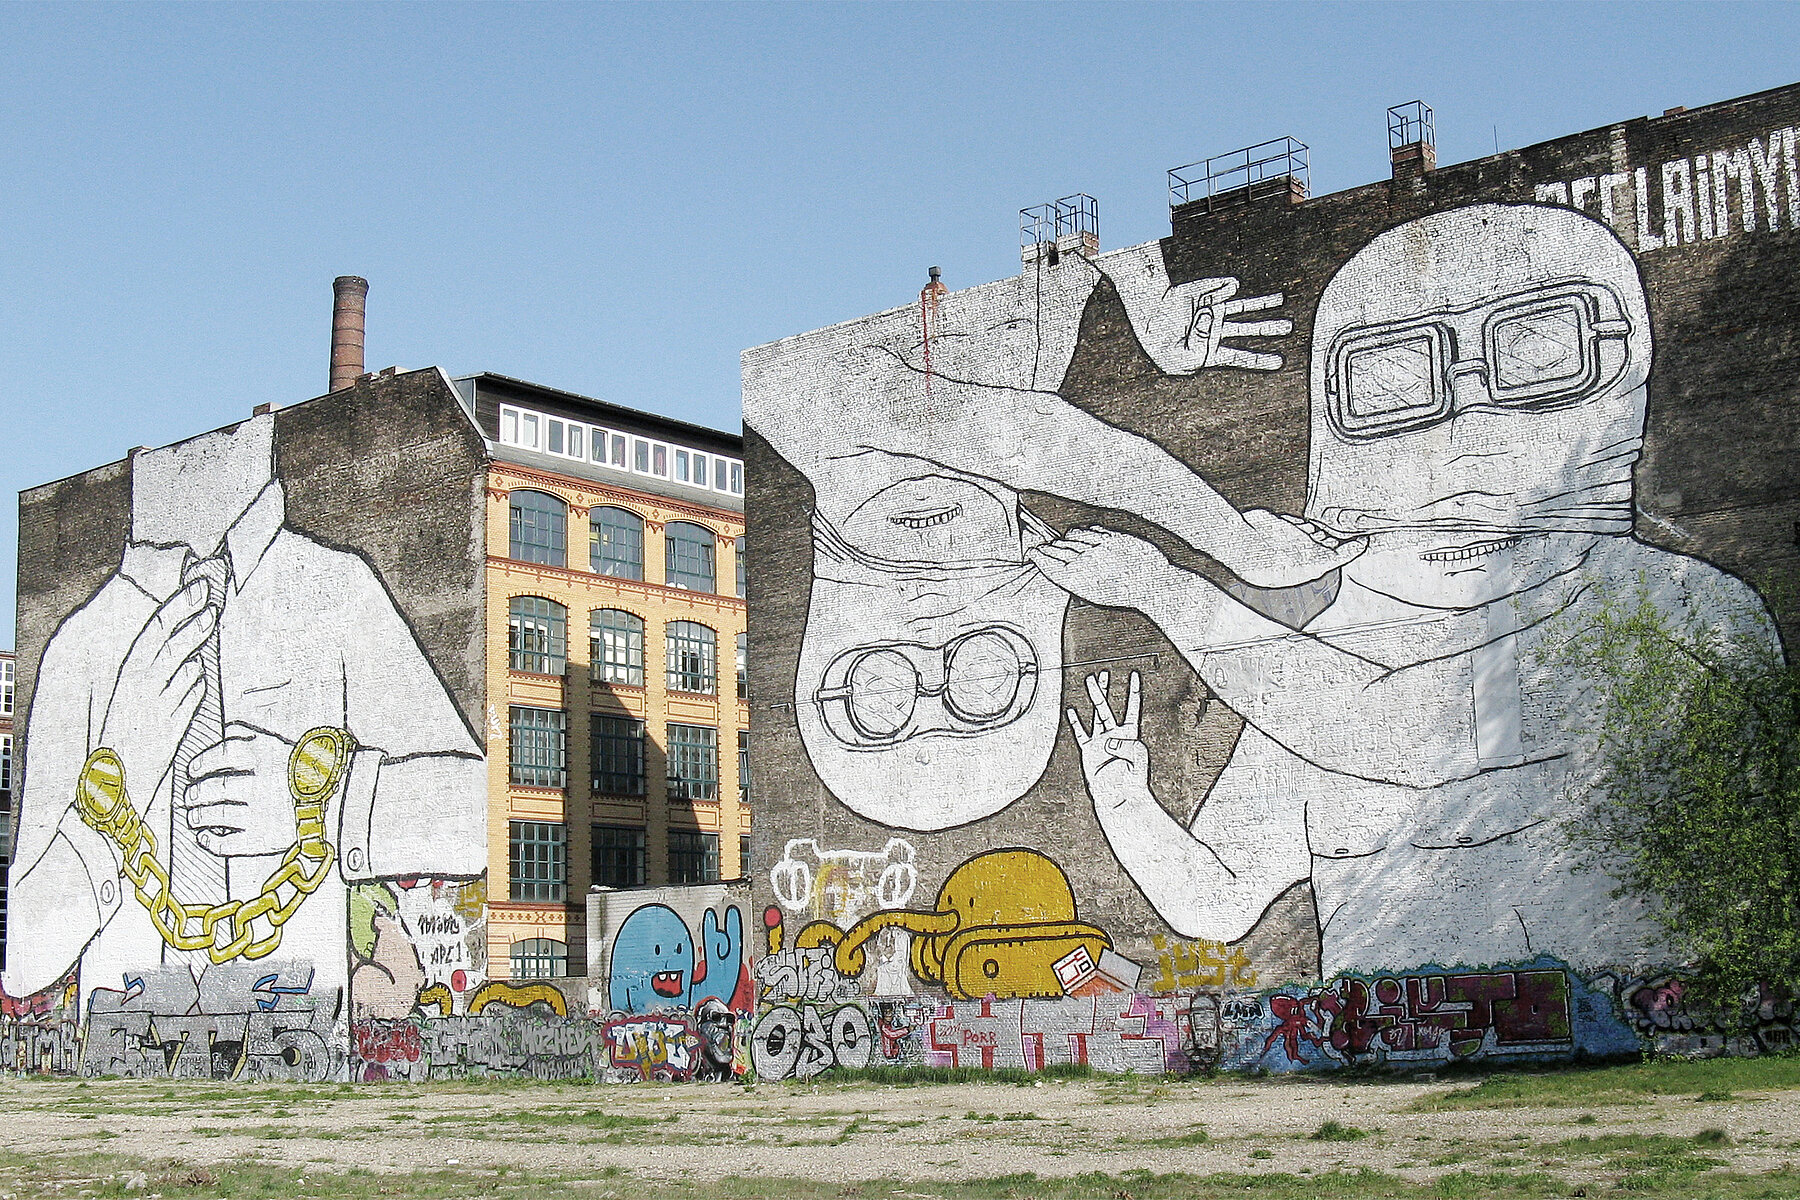 Two graffiti on house walls on the Cuvry wasteland. On the left house there is a headless man wearing gold watches on both wrists, which are connected by a chain. On the right wall are two masked figures wearing diving goggles, the left figure is upside down.